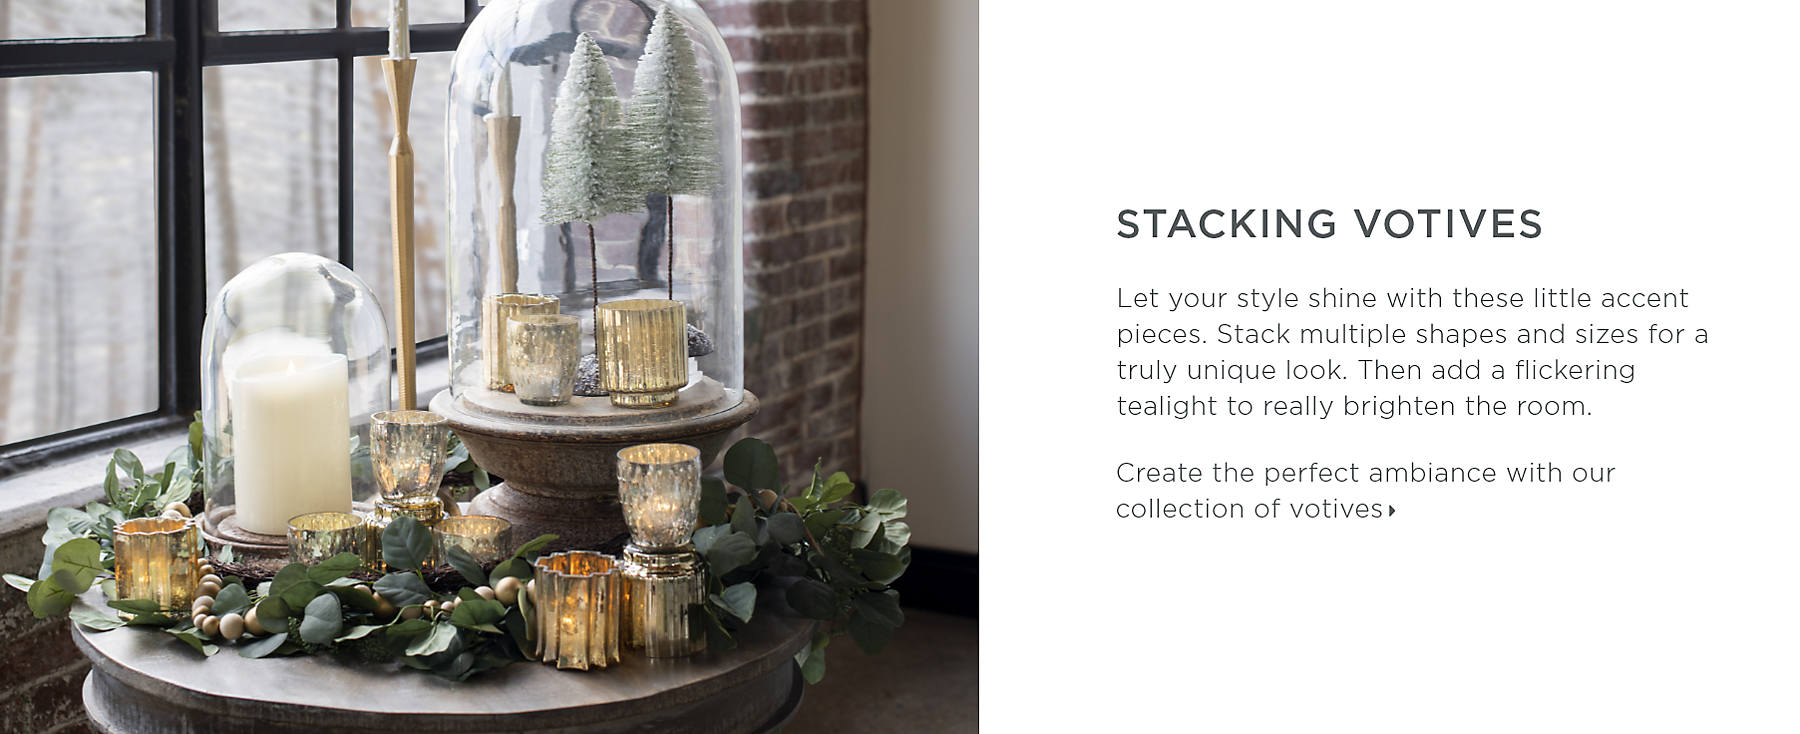 Stacking Votives Let your style shine with these little accent pieces. Stack multiple shapes and sizes for a truly unique look. Then add a flickering tealight to really brighten the room. Create the perfect ambiance with our collection of votives.